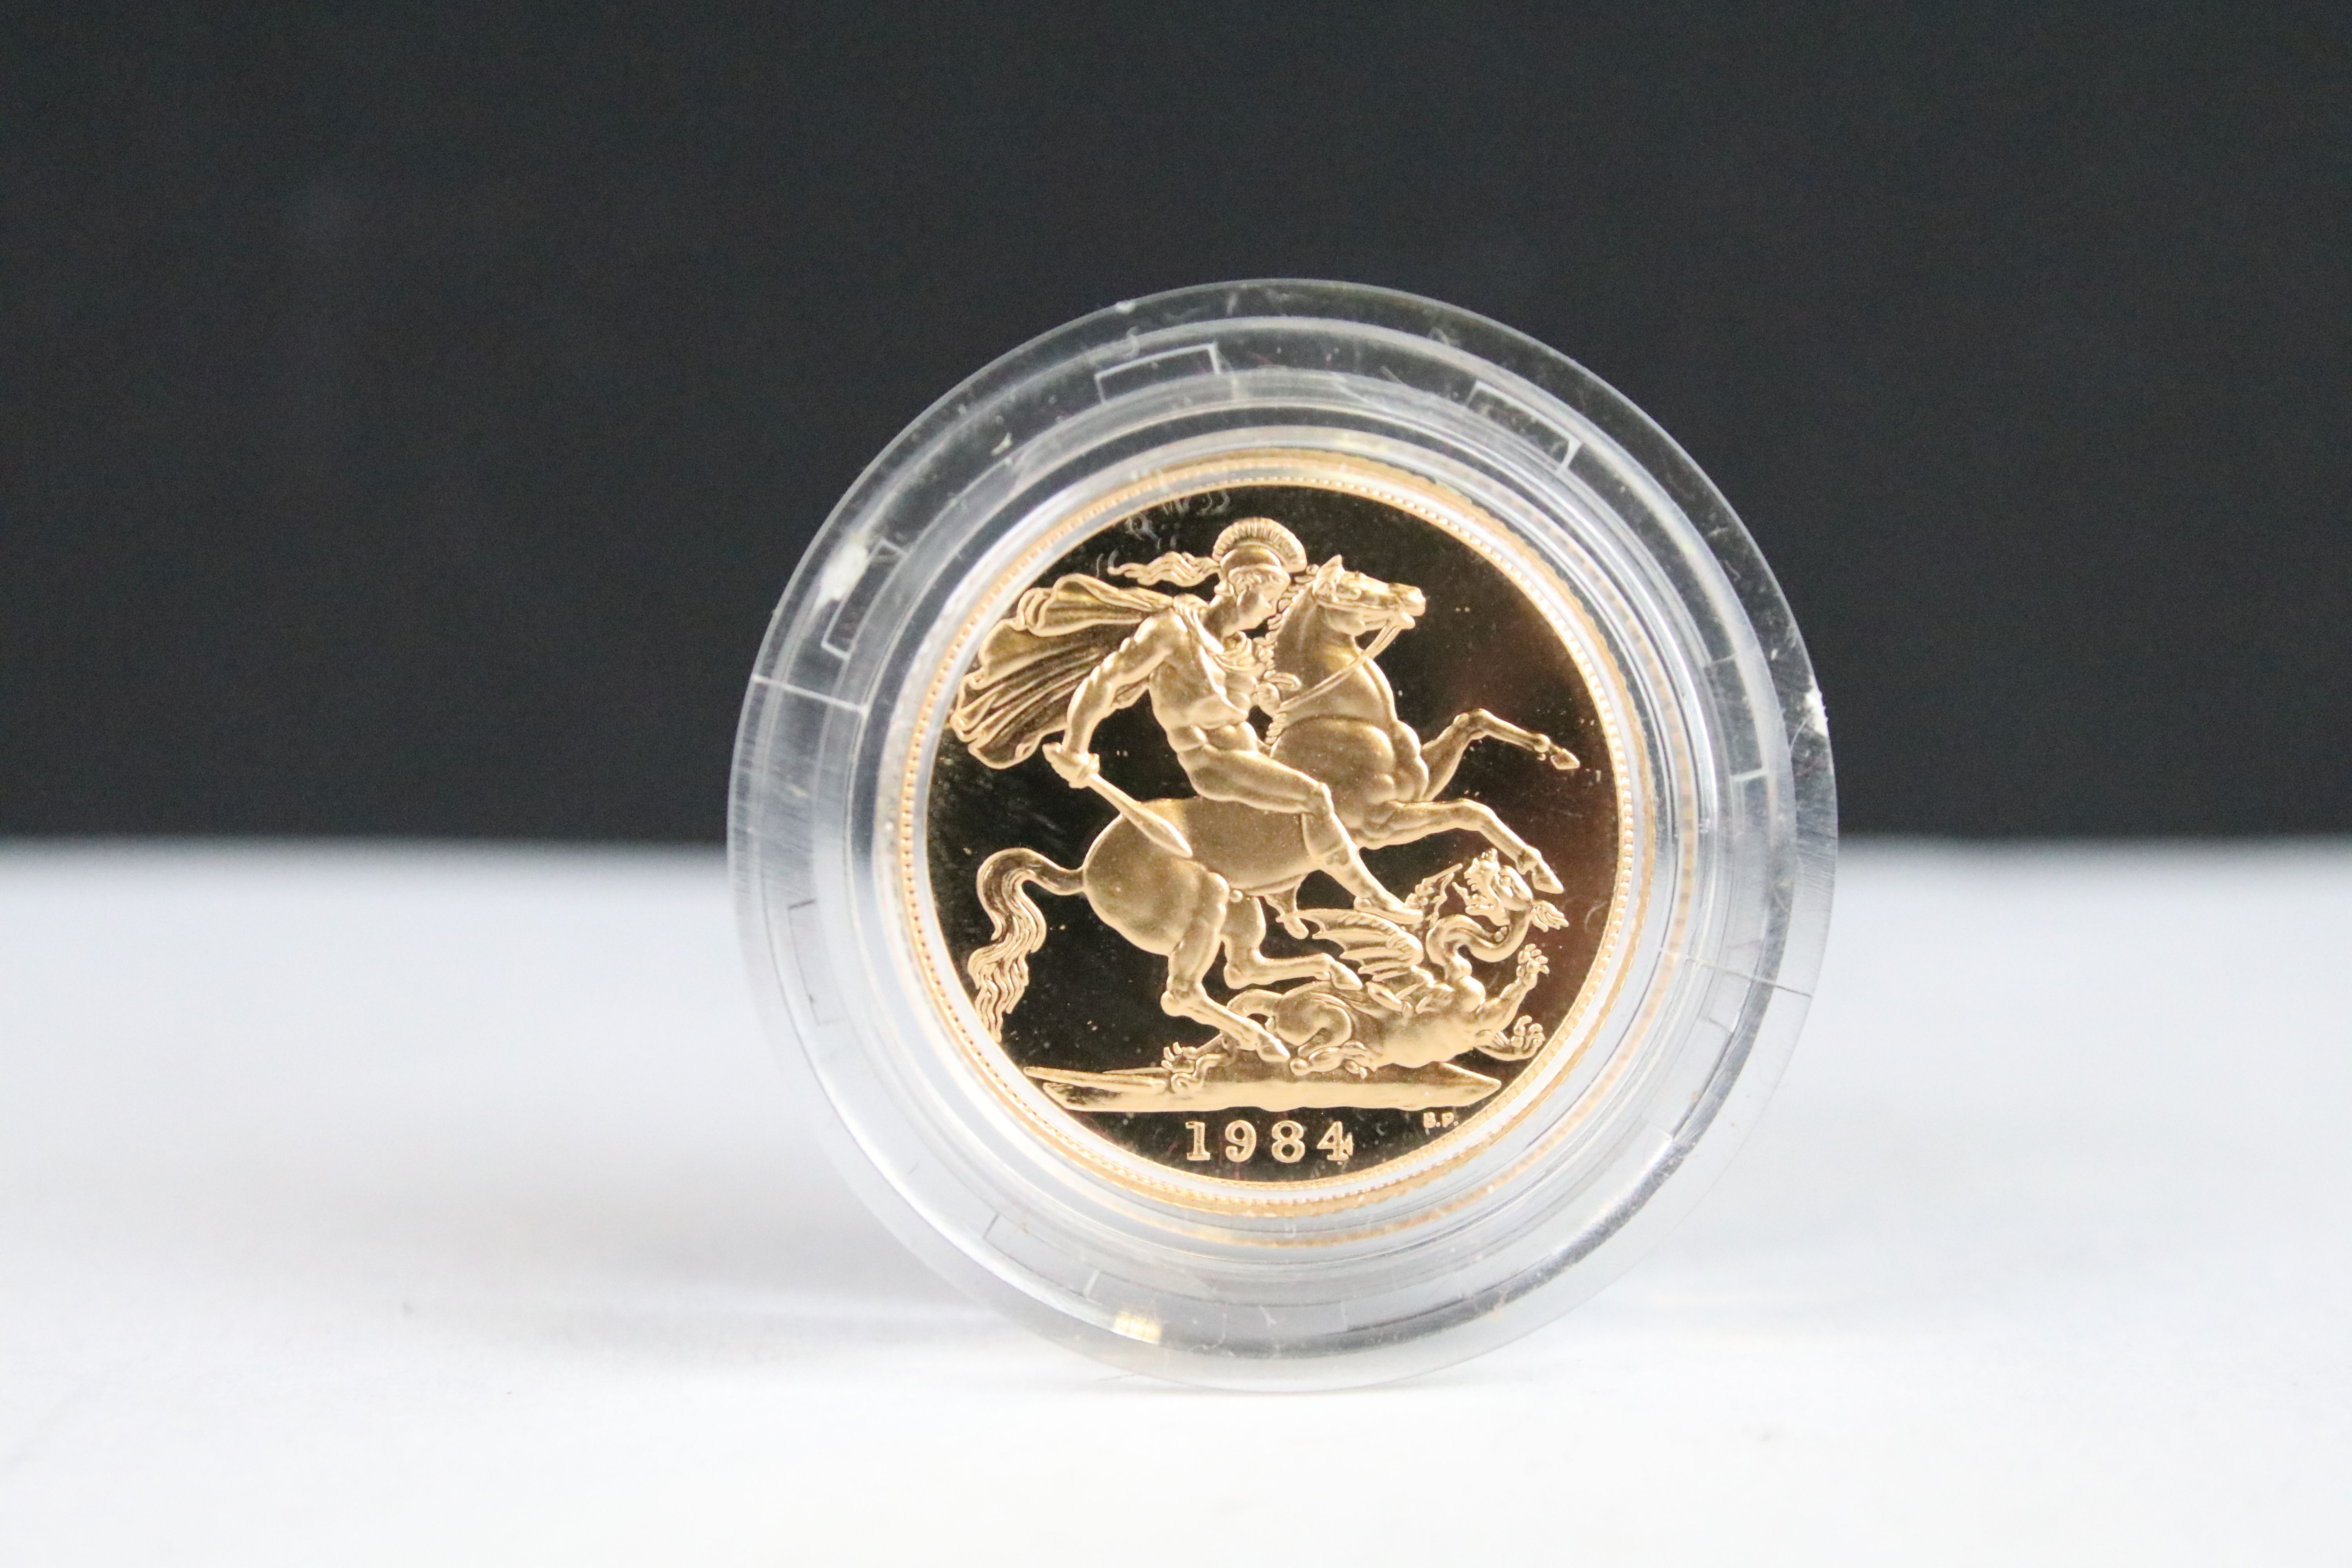 A British Royal Mint Queen Elizabeth II proof 1984 gold full sovereign coin encapsulated within - Image 2 of 4